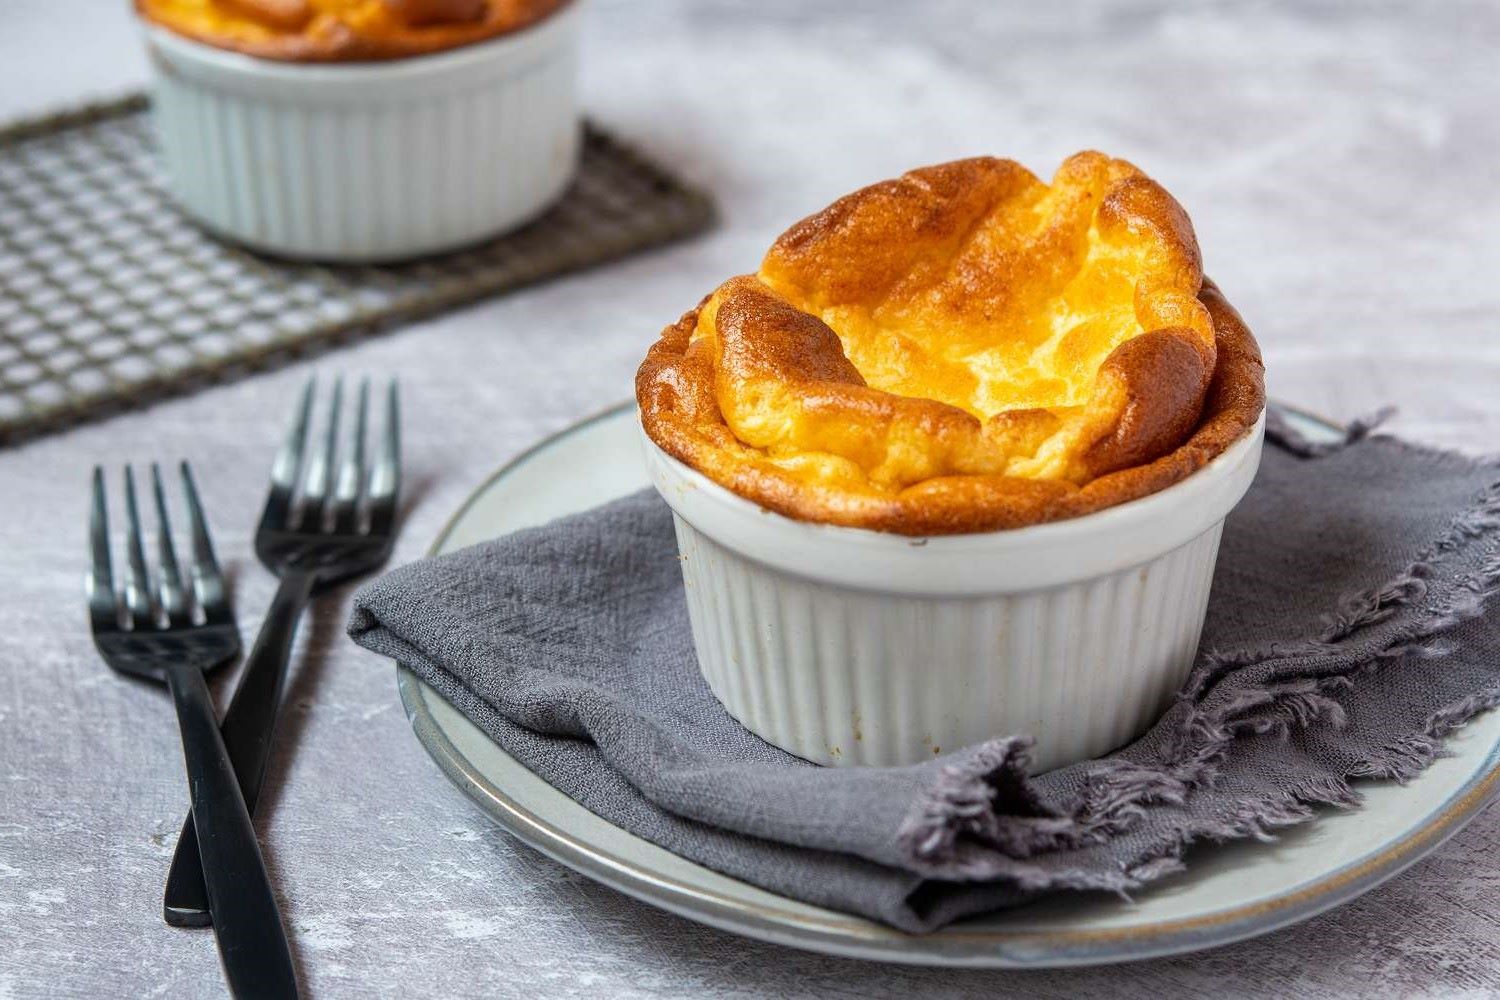 8-facts-about-national-cheese-souffle-day-may-18th